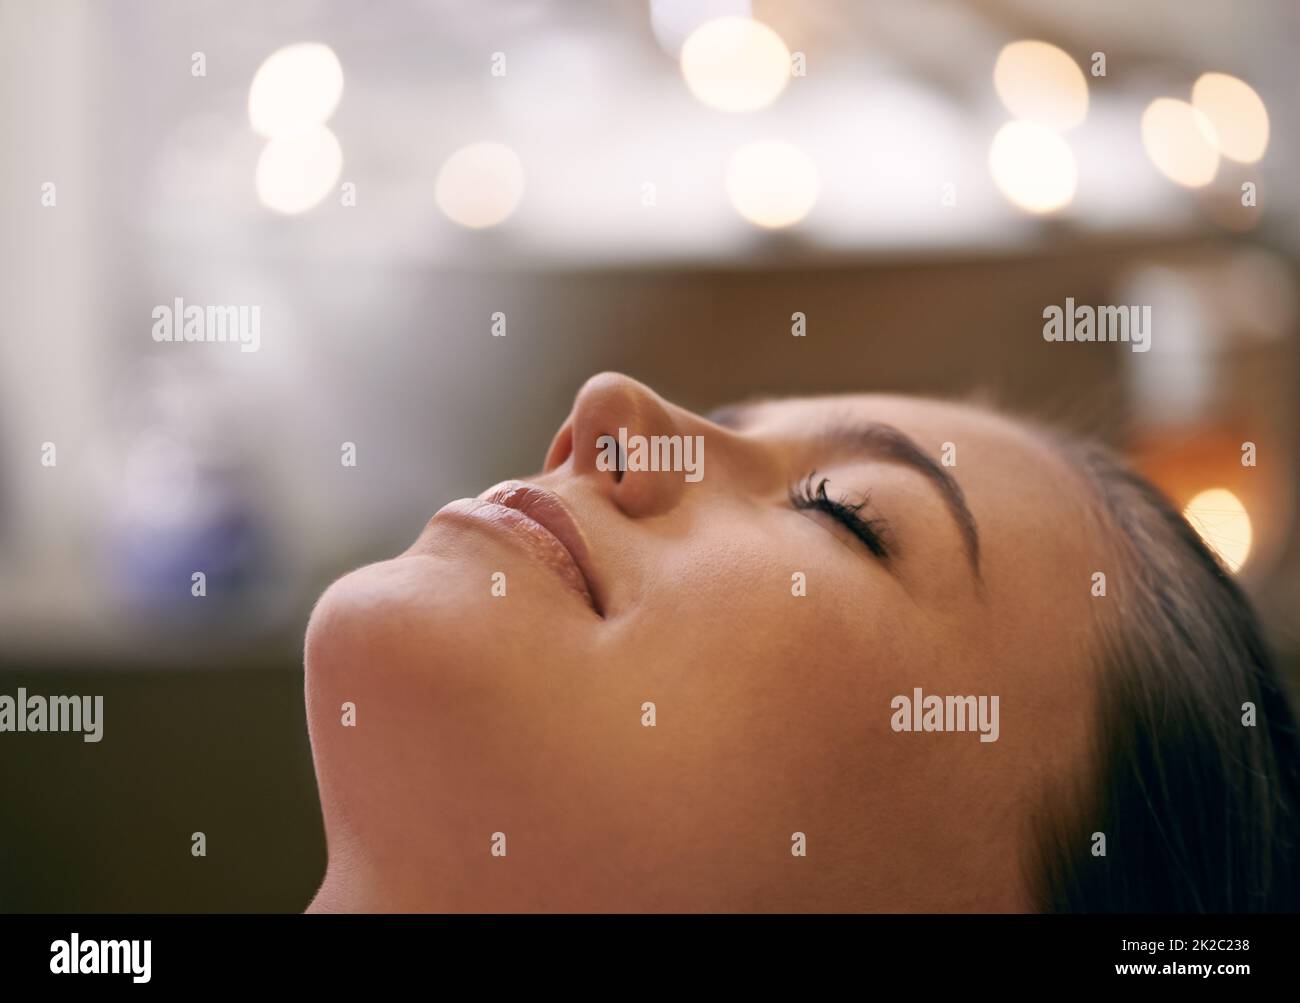 Total relaxation. Closeup of a young womans face during a massage. Stock Photo